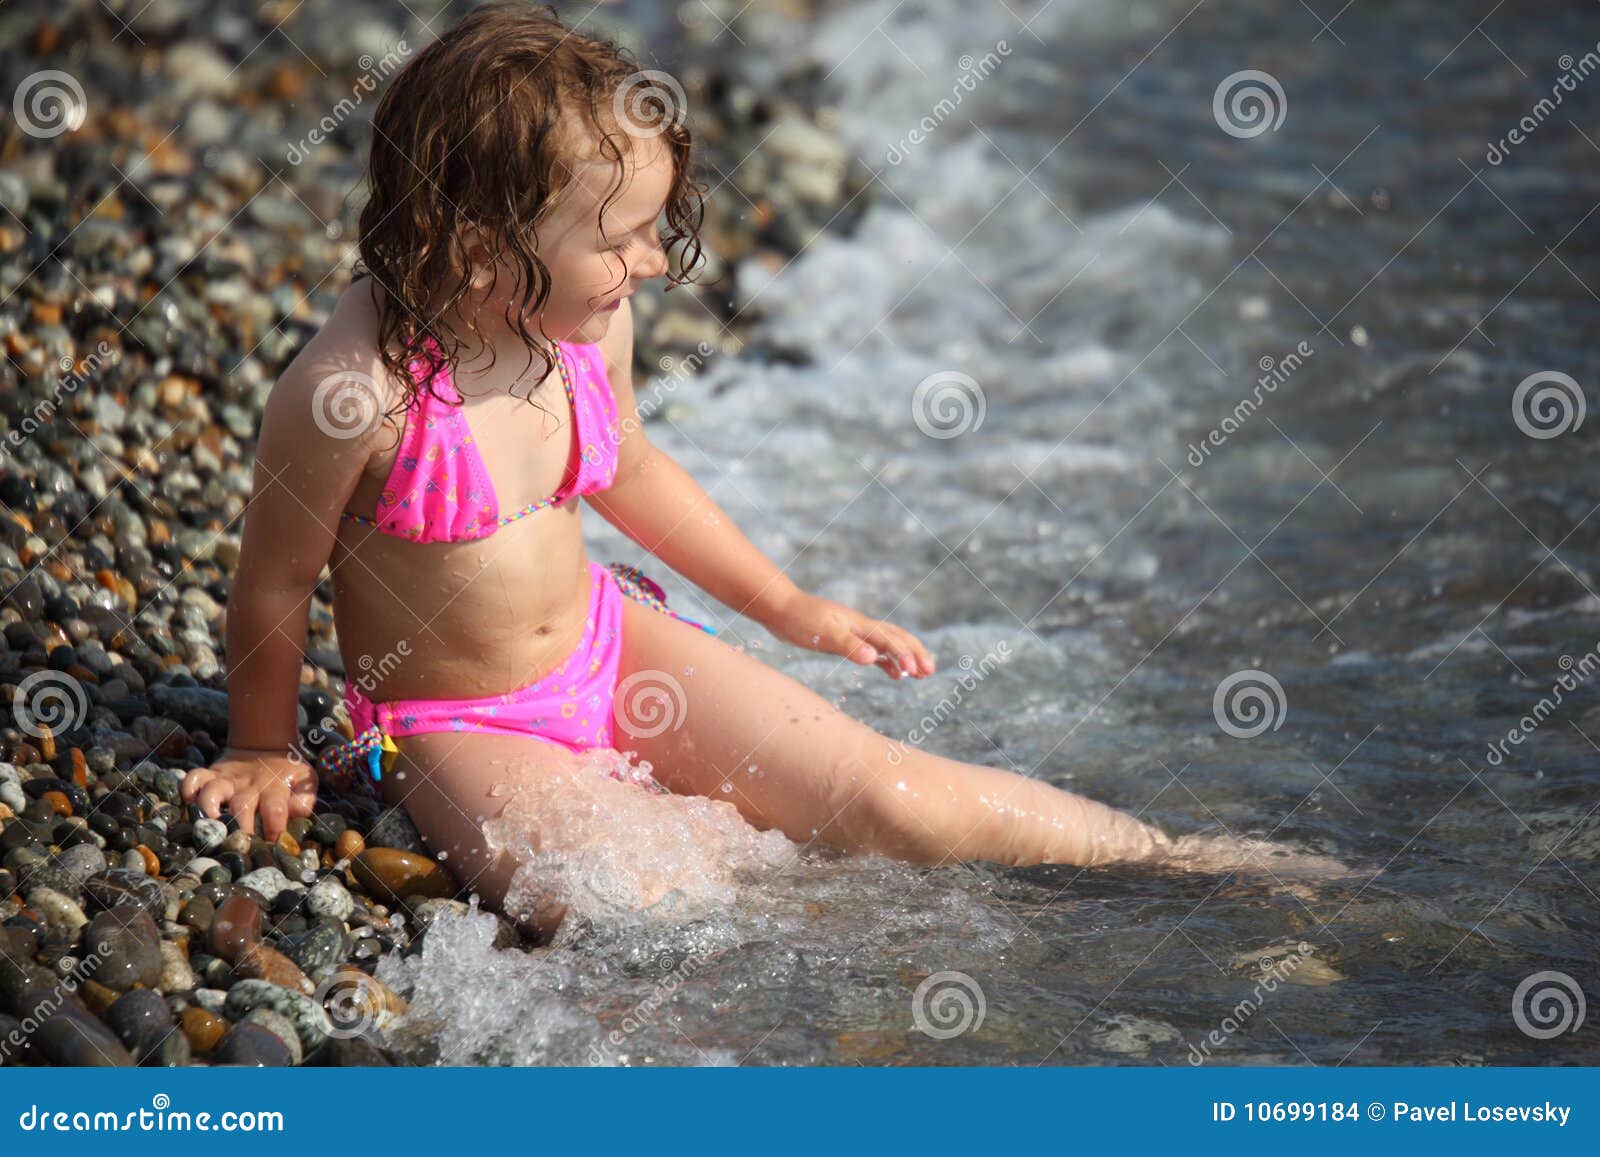 girl sits ashore in waves